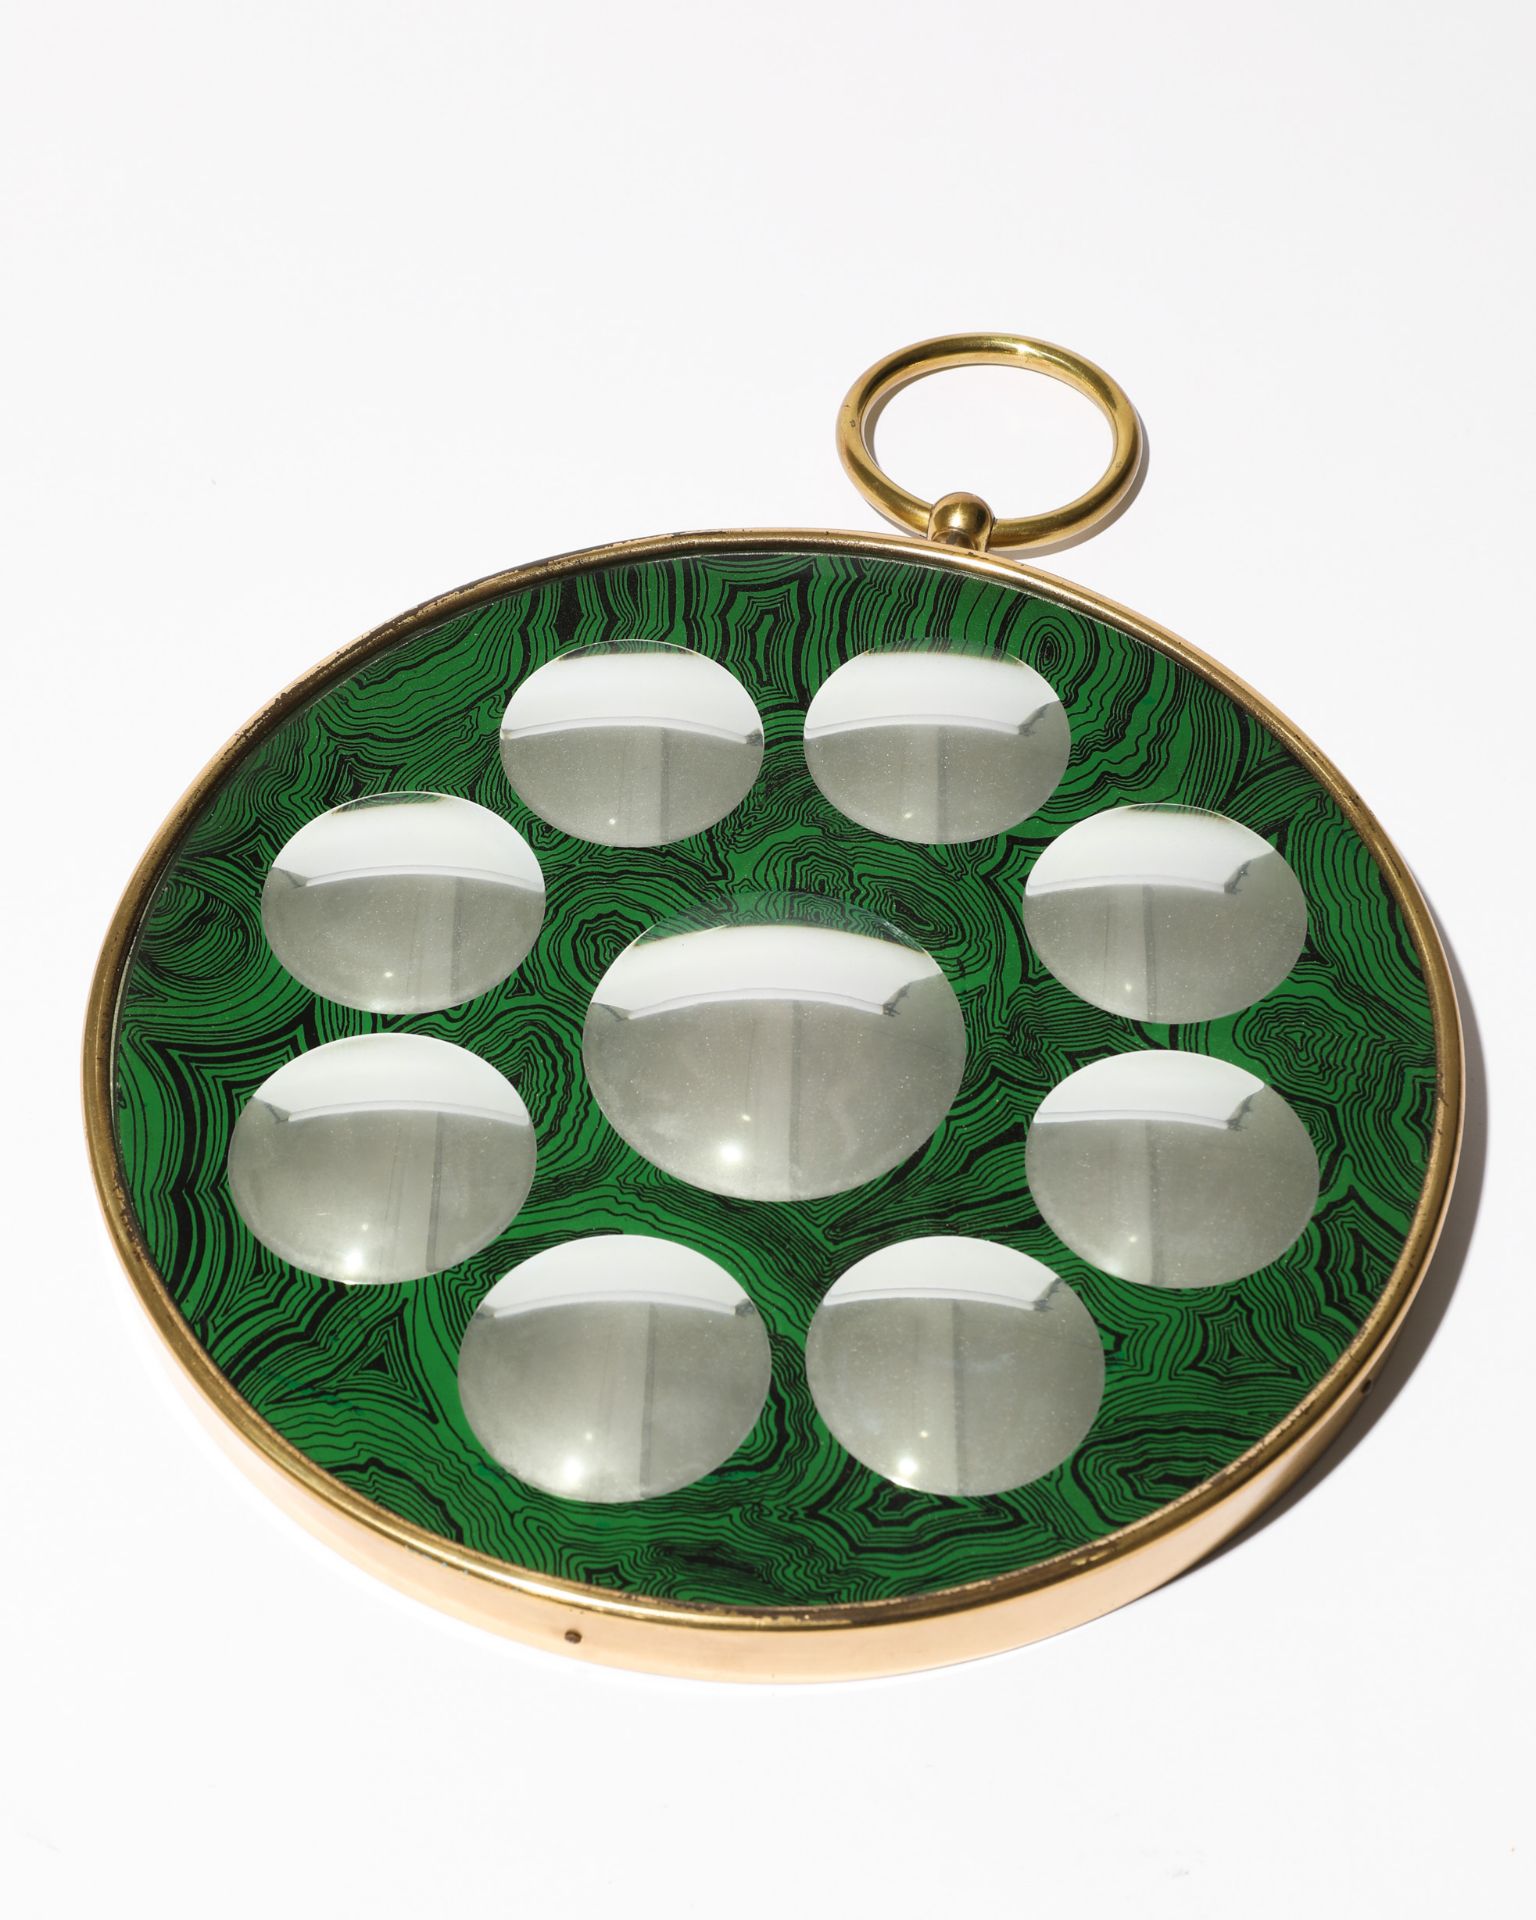 Piero Fornasetti, Wall Mirror with convex circles - Image 2 of 5